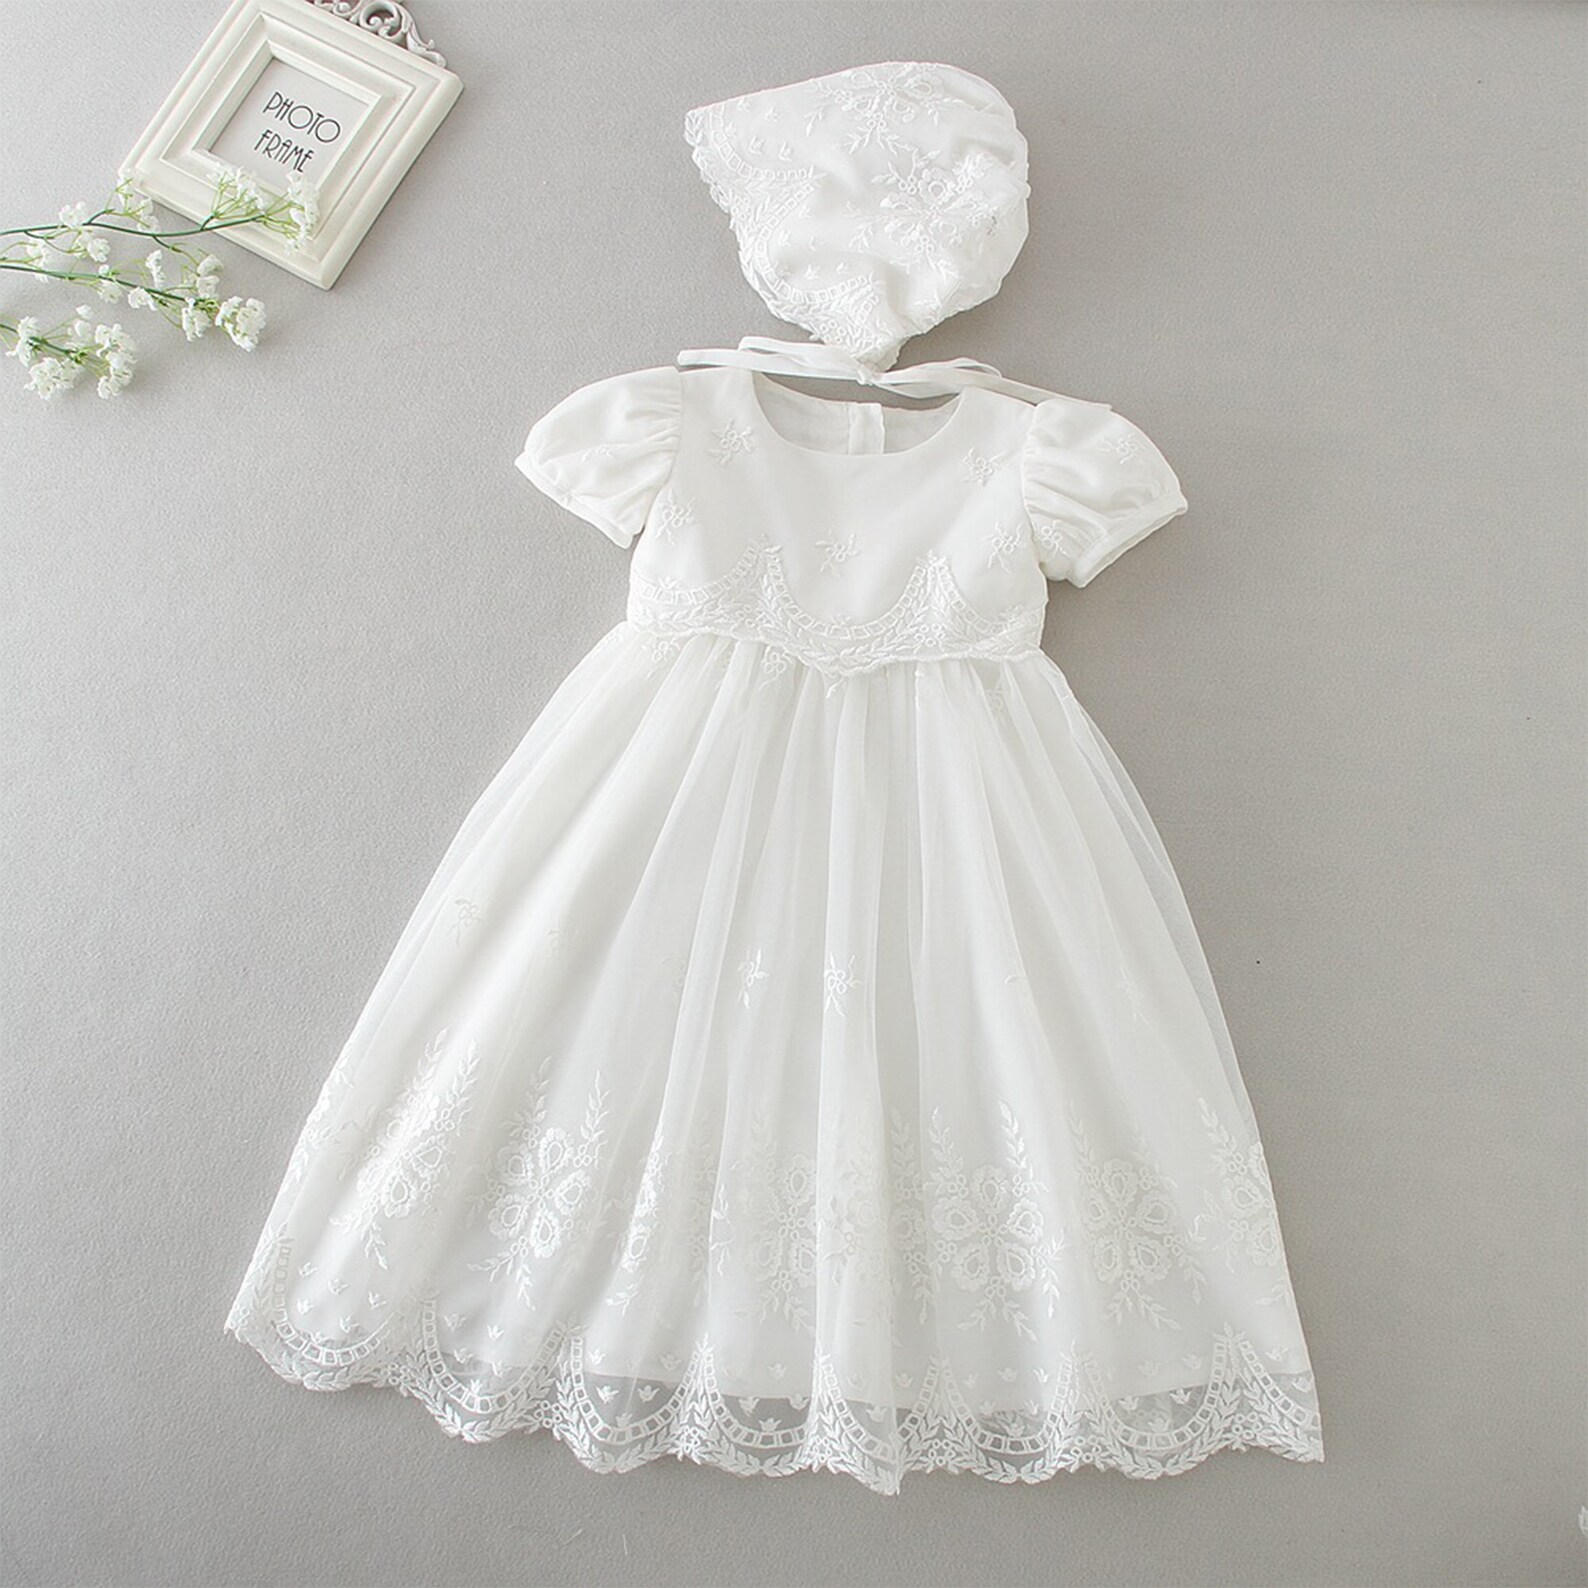 Vintage Lace Christening Gown Crochet Pattern and Bonnet - Etsy